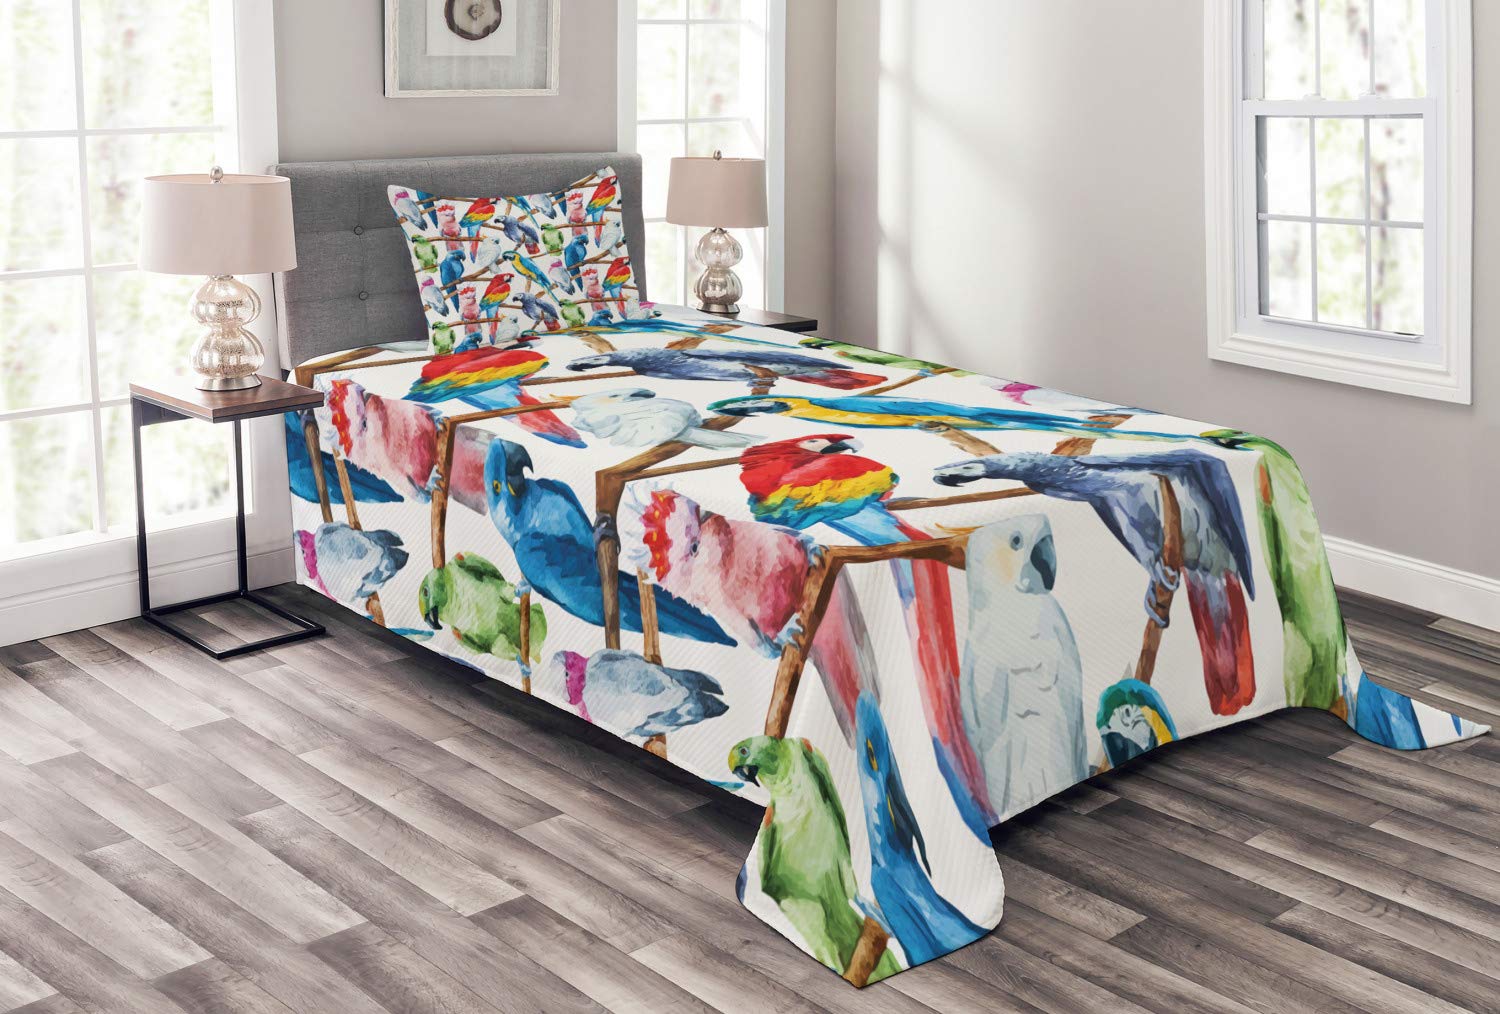 Lunarable Parrots Bedspread, Colorful Parrots on Tree Branches Exotic Jungle Theme Watercolor Painting Effect, Decorative Quilted 2 Piece Coverlet ...